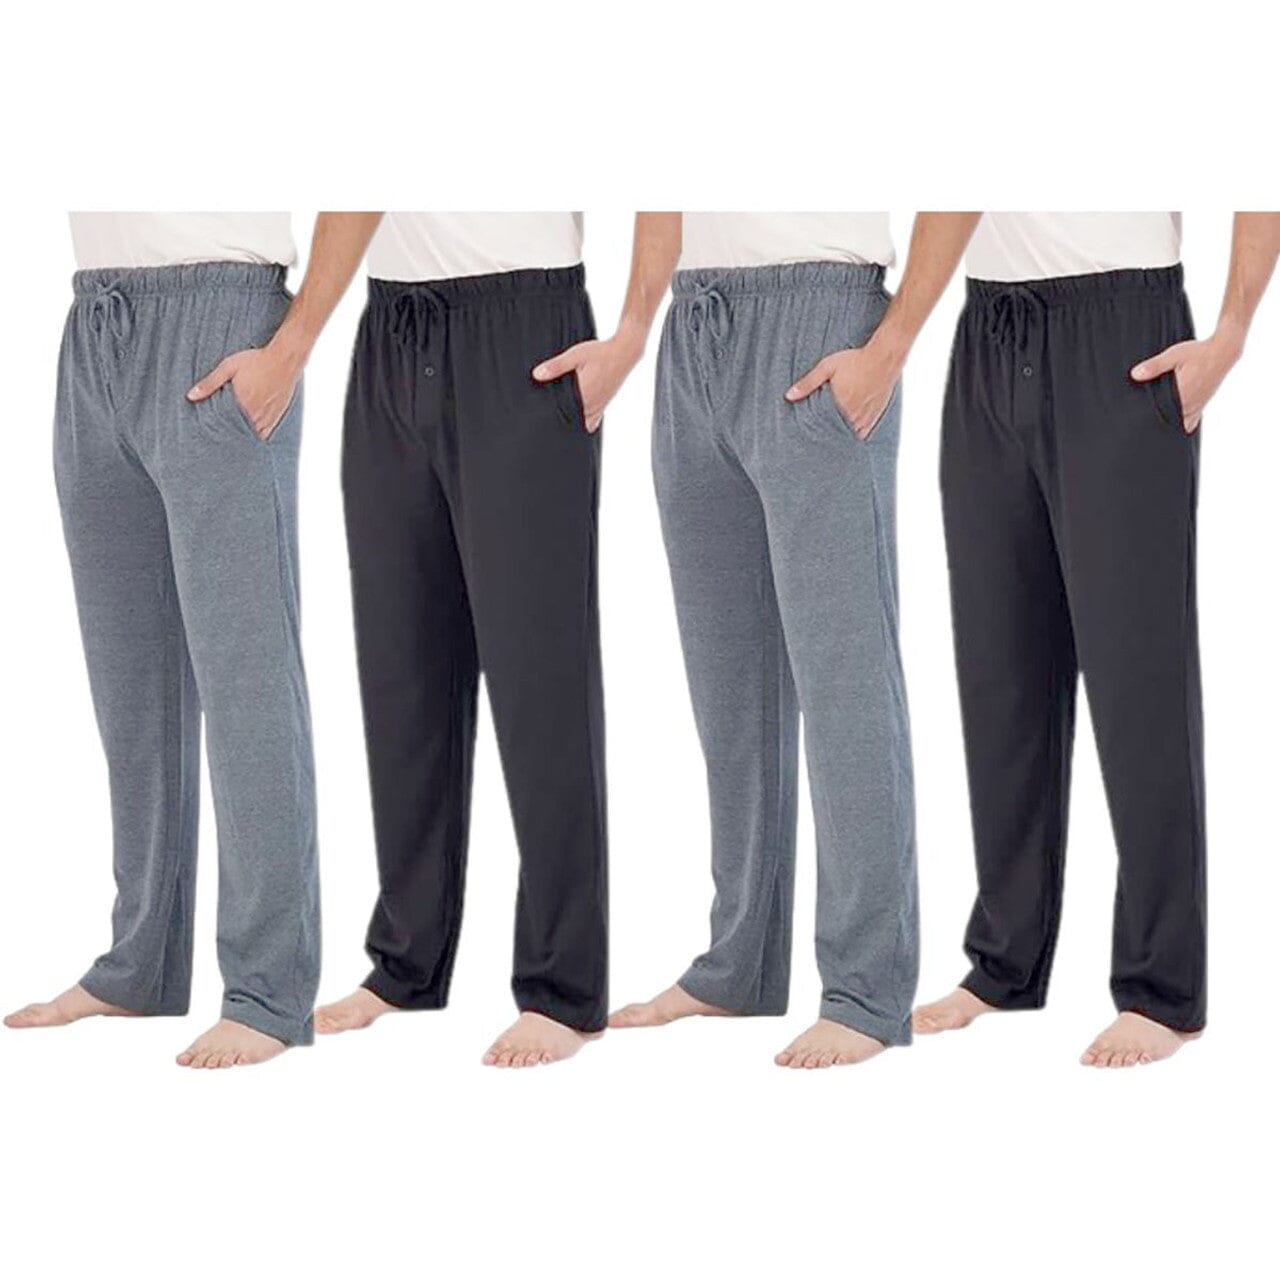 4-Pack: Men's Cotton Lounge Pants with Pockets